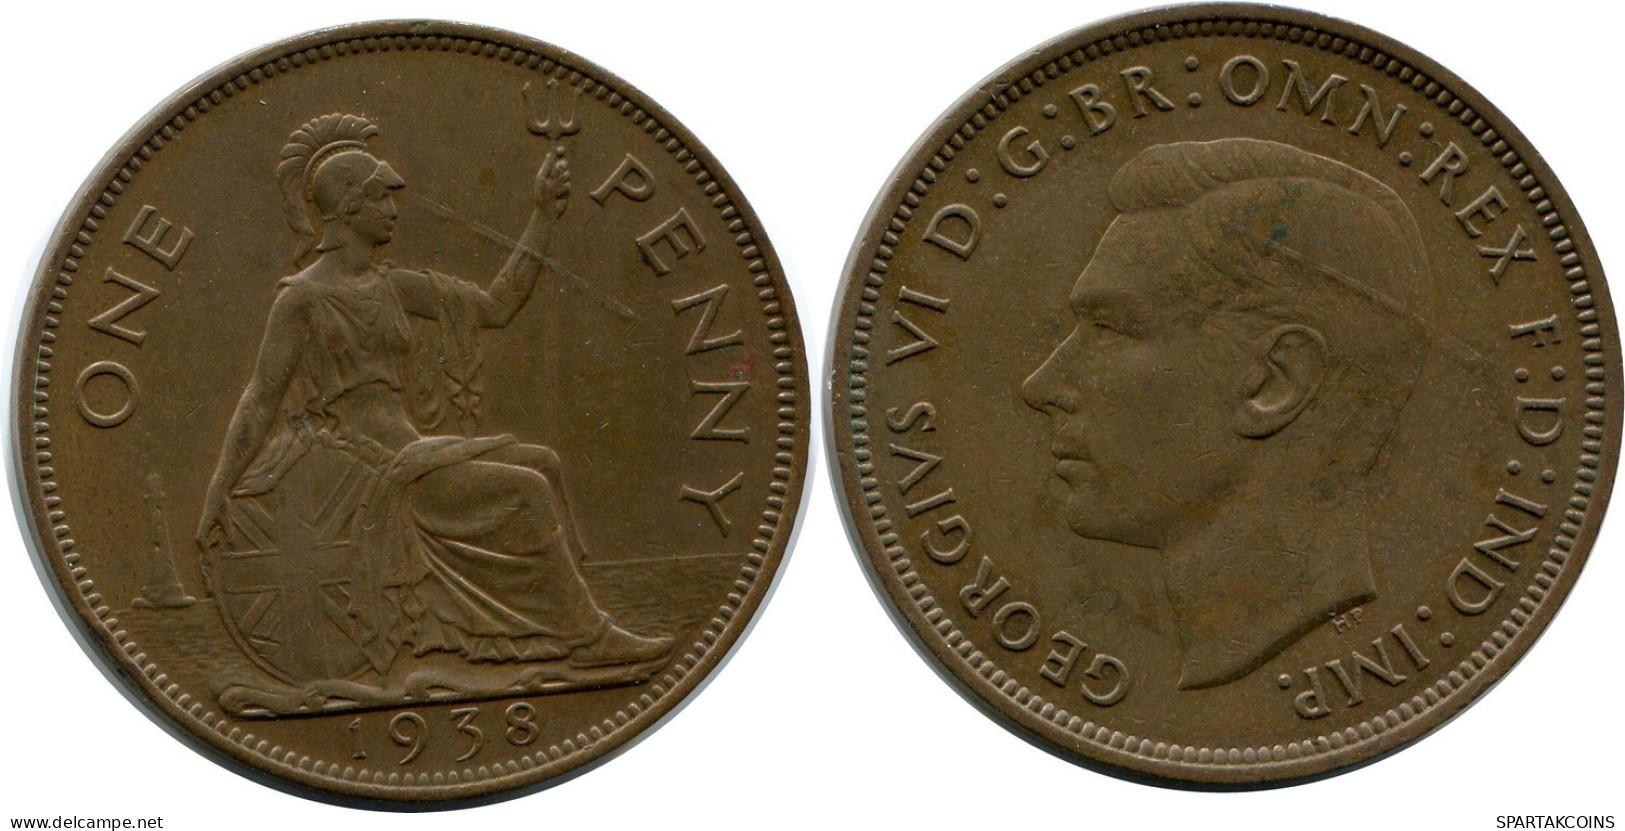 PENNY 1938 UK GREAT BRITAIN Coin #BB022.U.A - D. 1 Penny